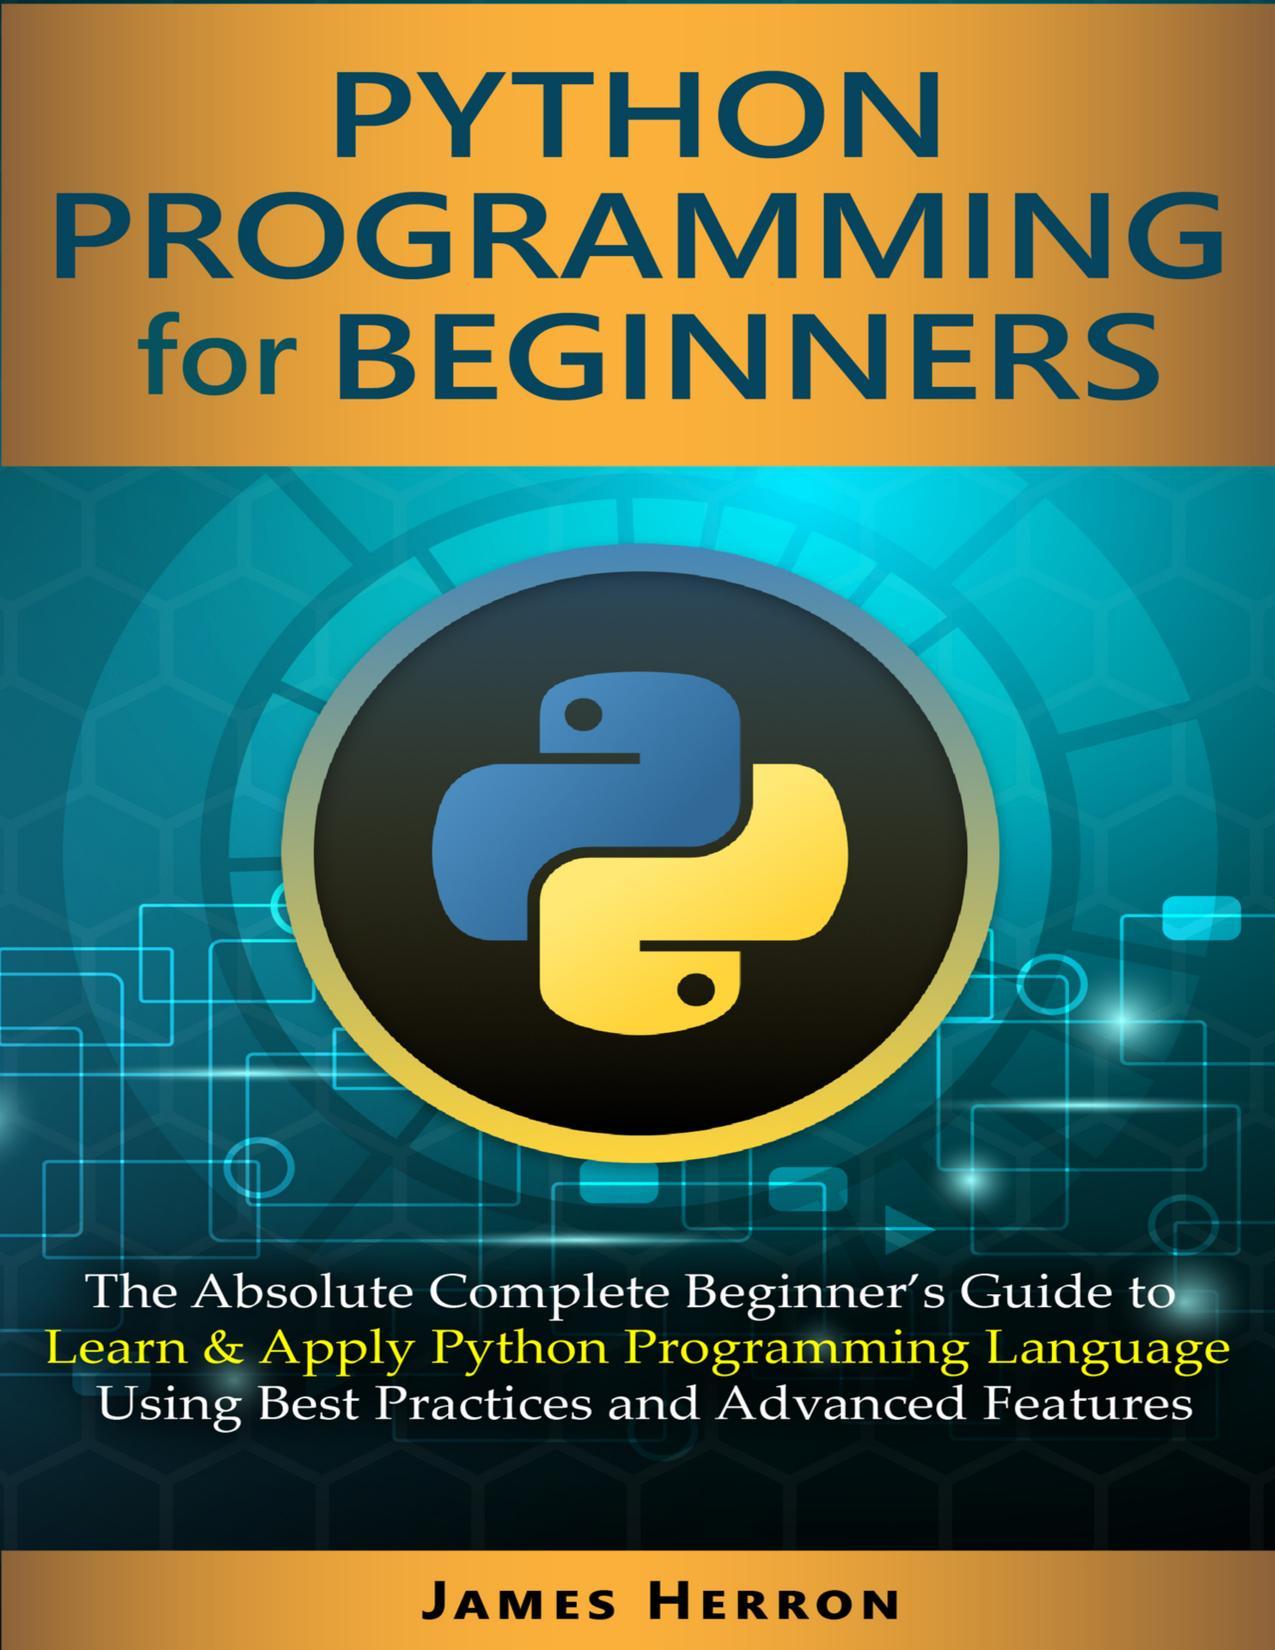 Thumbnail of book Python Programming For Beginners by James Herron cover